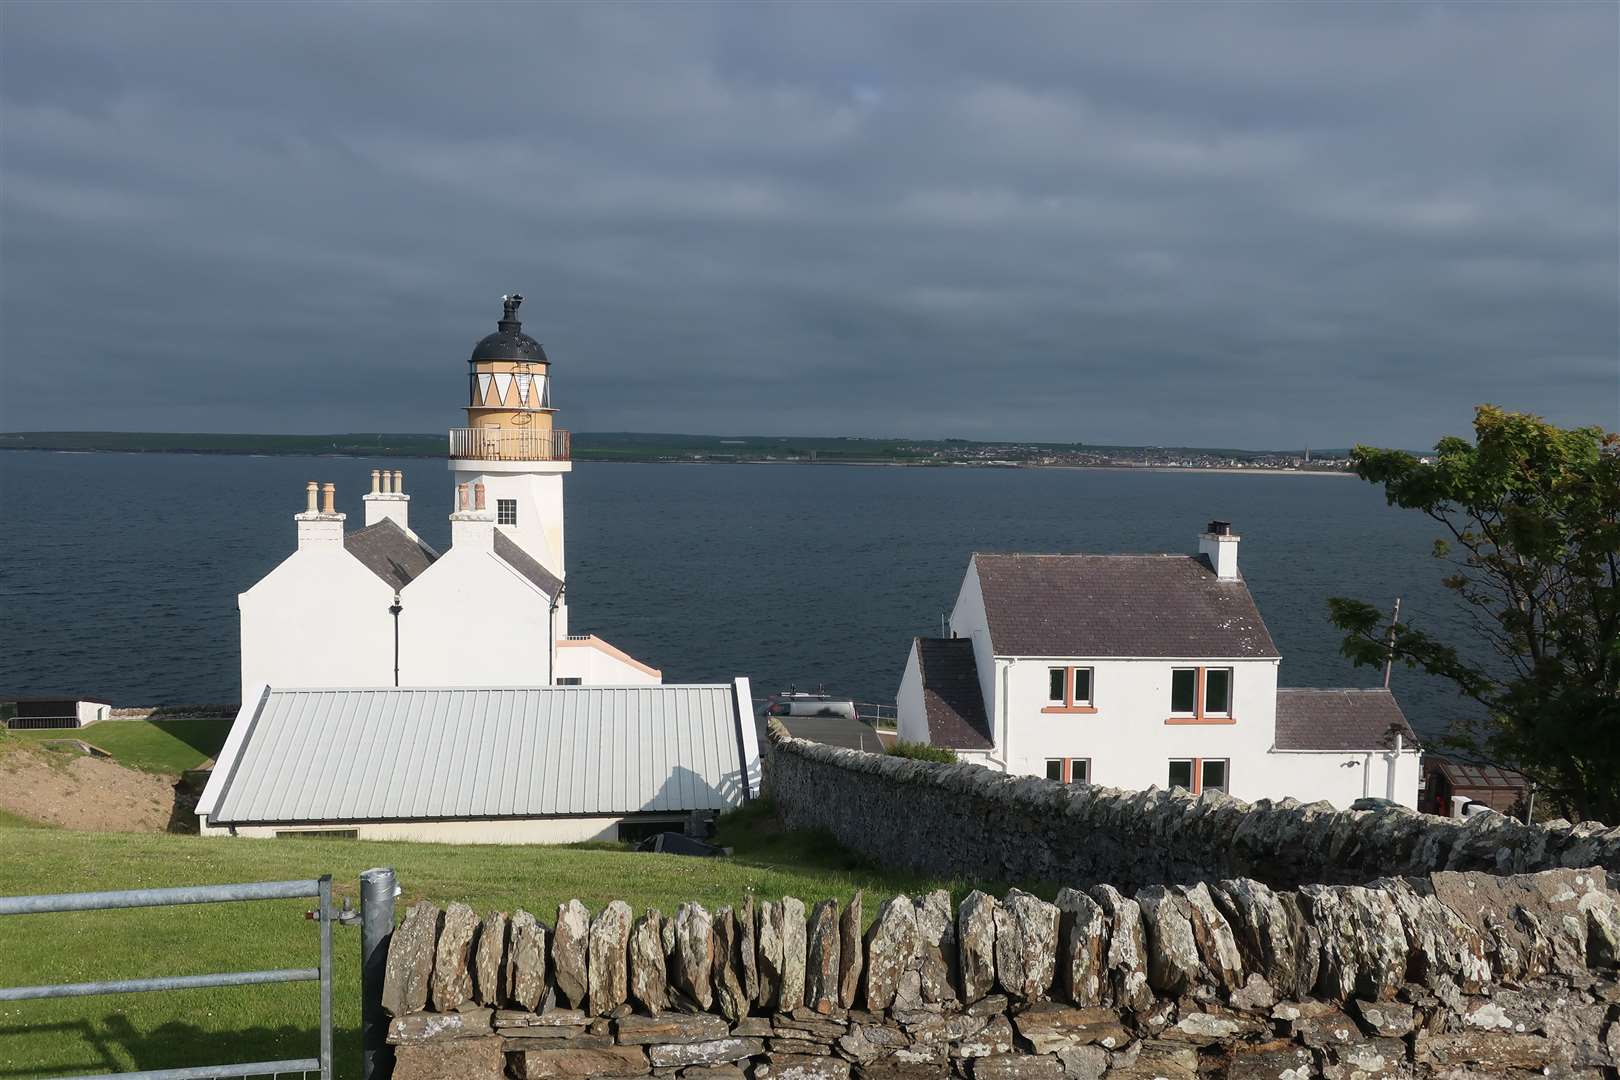 The former lighthouse is now a privately-owned residence. Picture: John Davidson